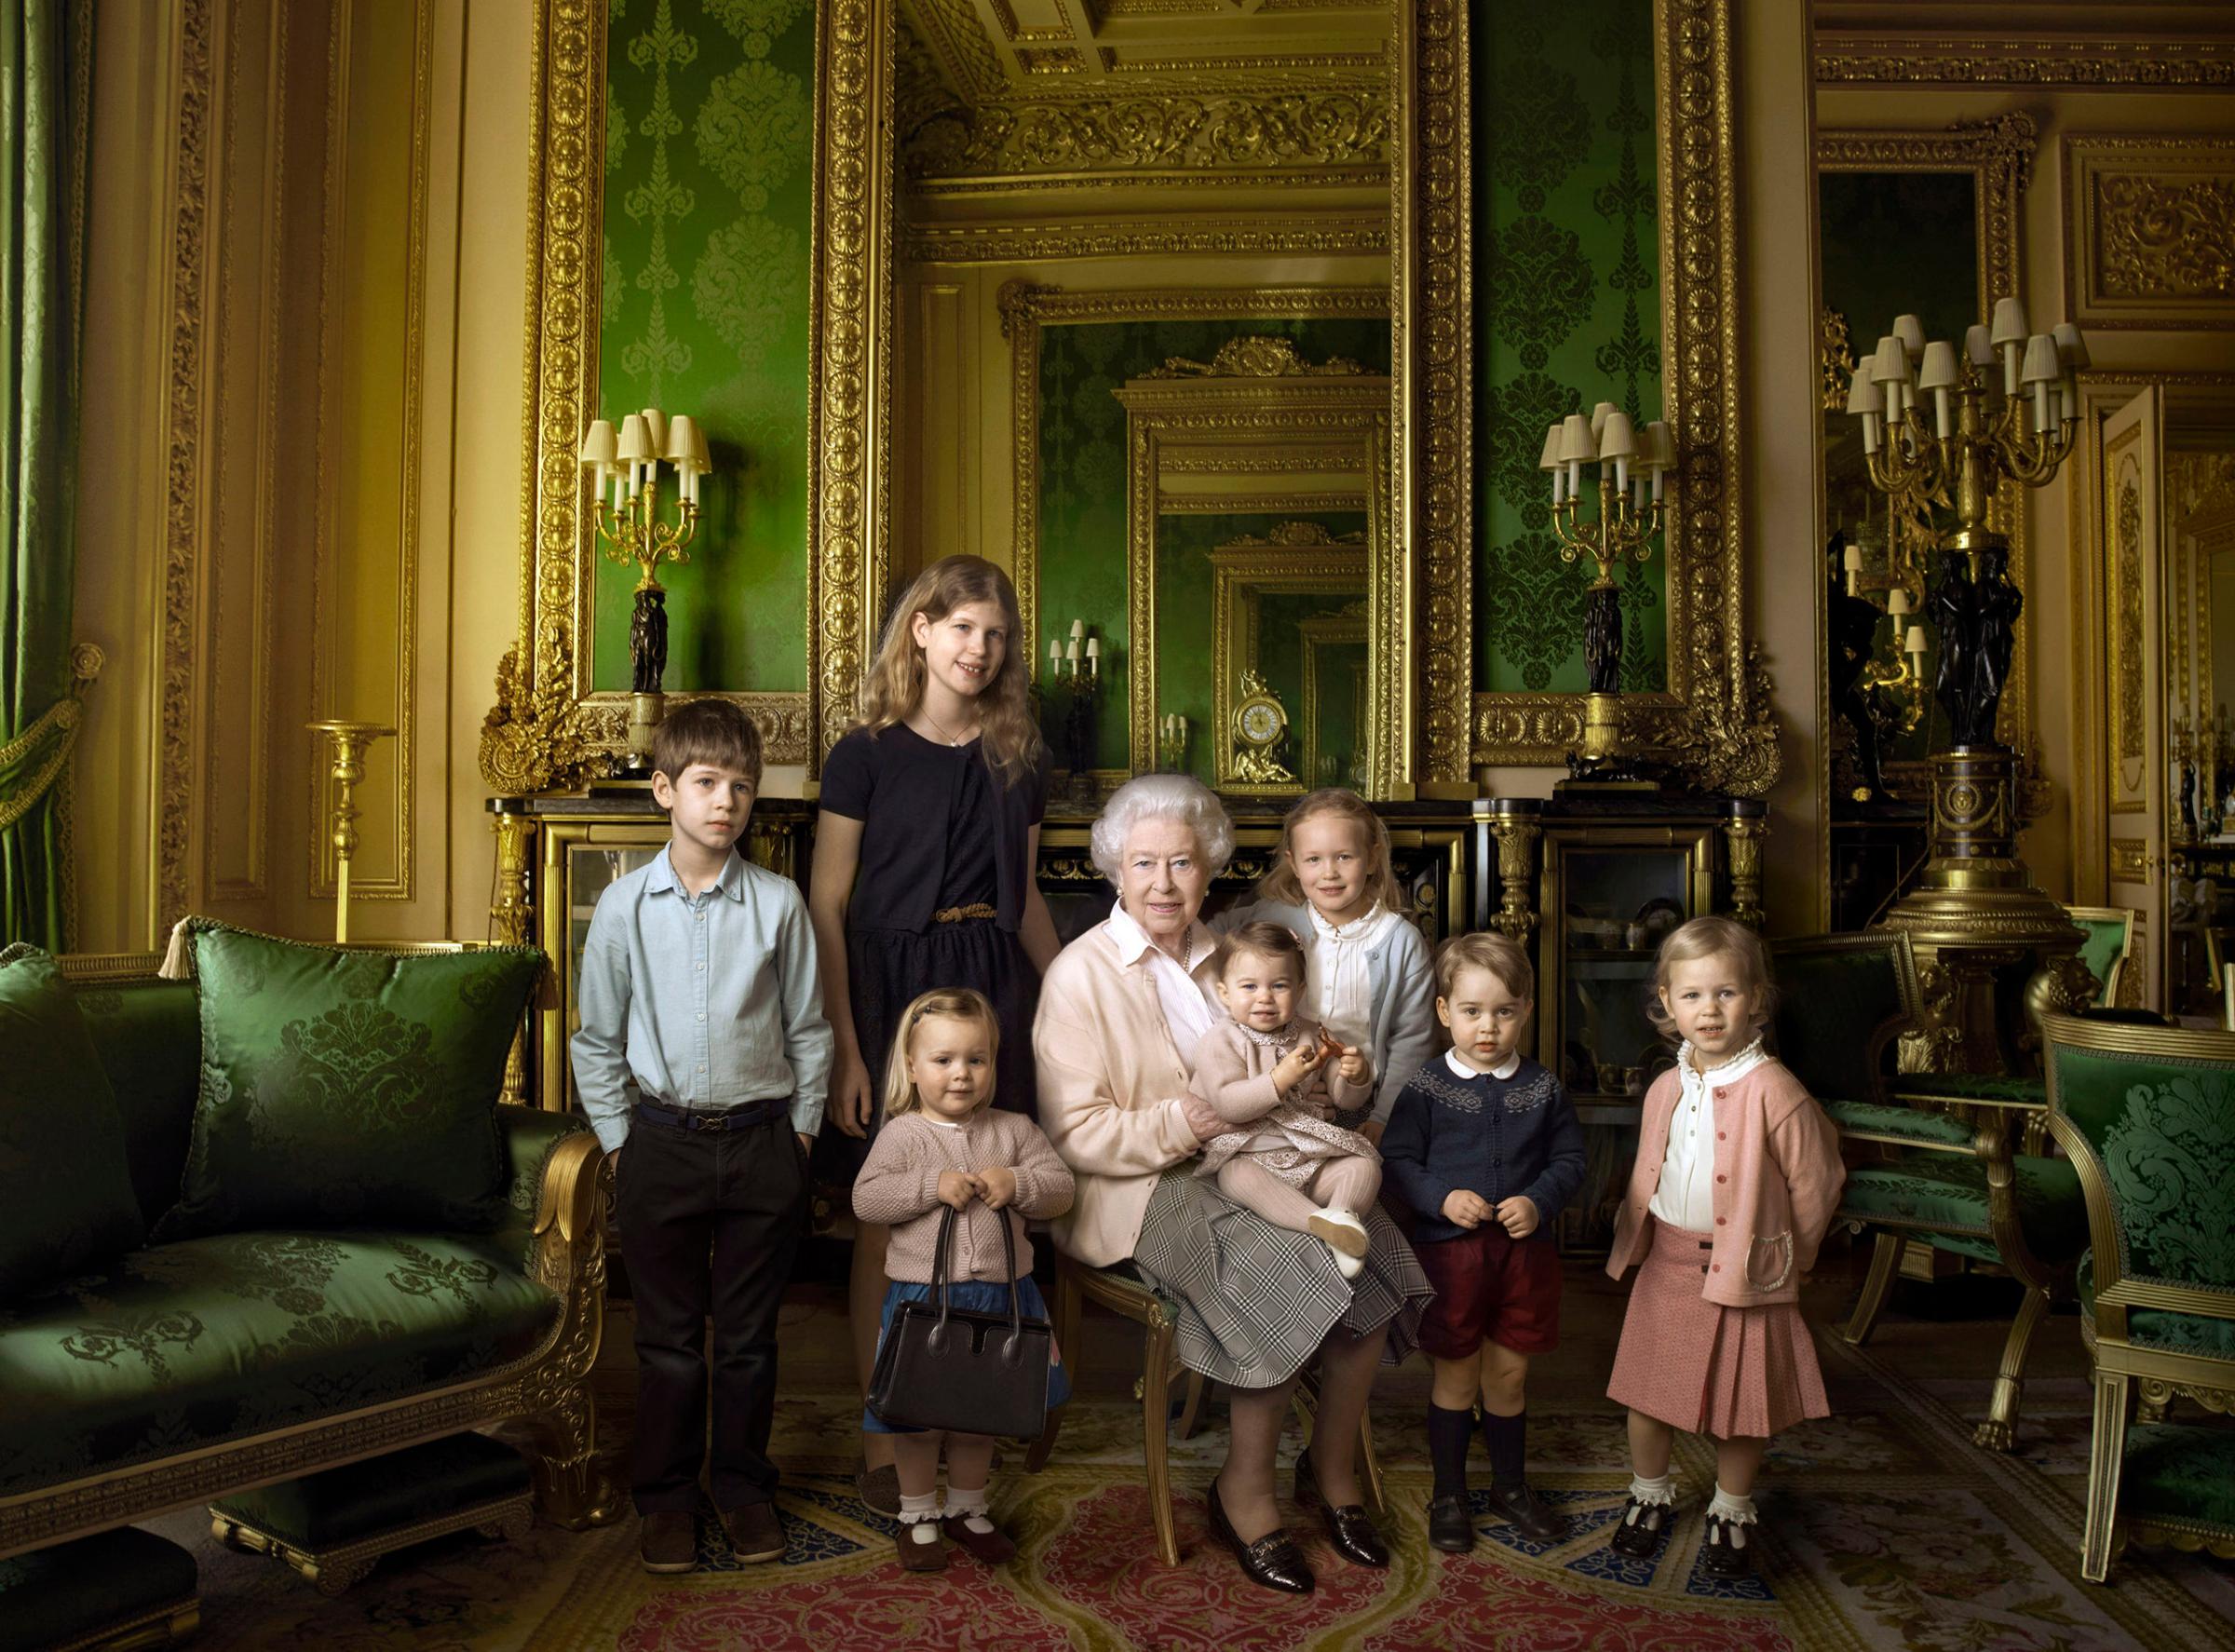 Queen Elizabeth II with her five great-grandchildren and her two youngest grandchildren in the Green Drawing Room, part of Windsor Castle's semi-State apartments in Windsor England. The children are: James, Viscount Severn, 8-years-old, left, and Lady Louise, 12-years-old, second left, the children of The Earl and Countess of Wessex; Mia Tindall, holding The Queen's handbag, the two year-old-daughter of Zara and Mike Tindall; Savannah 5-years-old, third right, and Isla Phillips, 3-years-old, right, daughters of The Queen's eldest grandson Peter Phillips and his wife Autumn; Prince George, 2-years-old, second right, and in The Queen's arms and in the tradition of Royal portraiture, the youngest great-grandchild, Princess Charlotte, 11-months-old, children of Prince William and Kate Duchess of Cambridge, April 20, 2016.